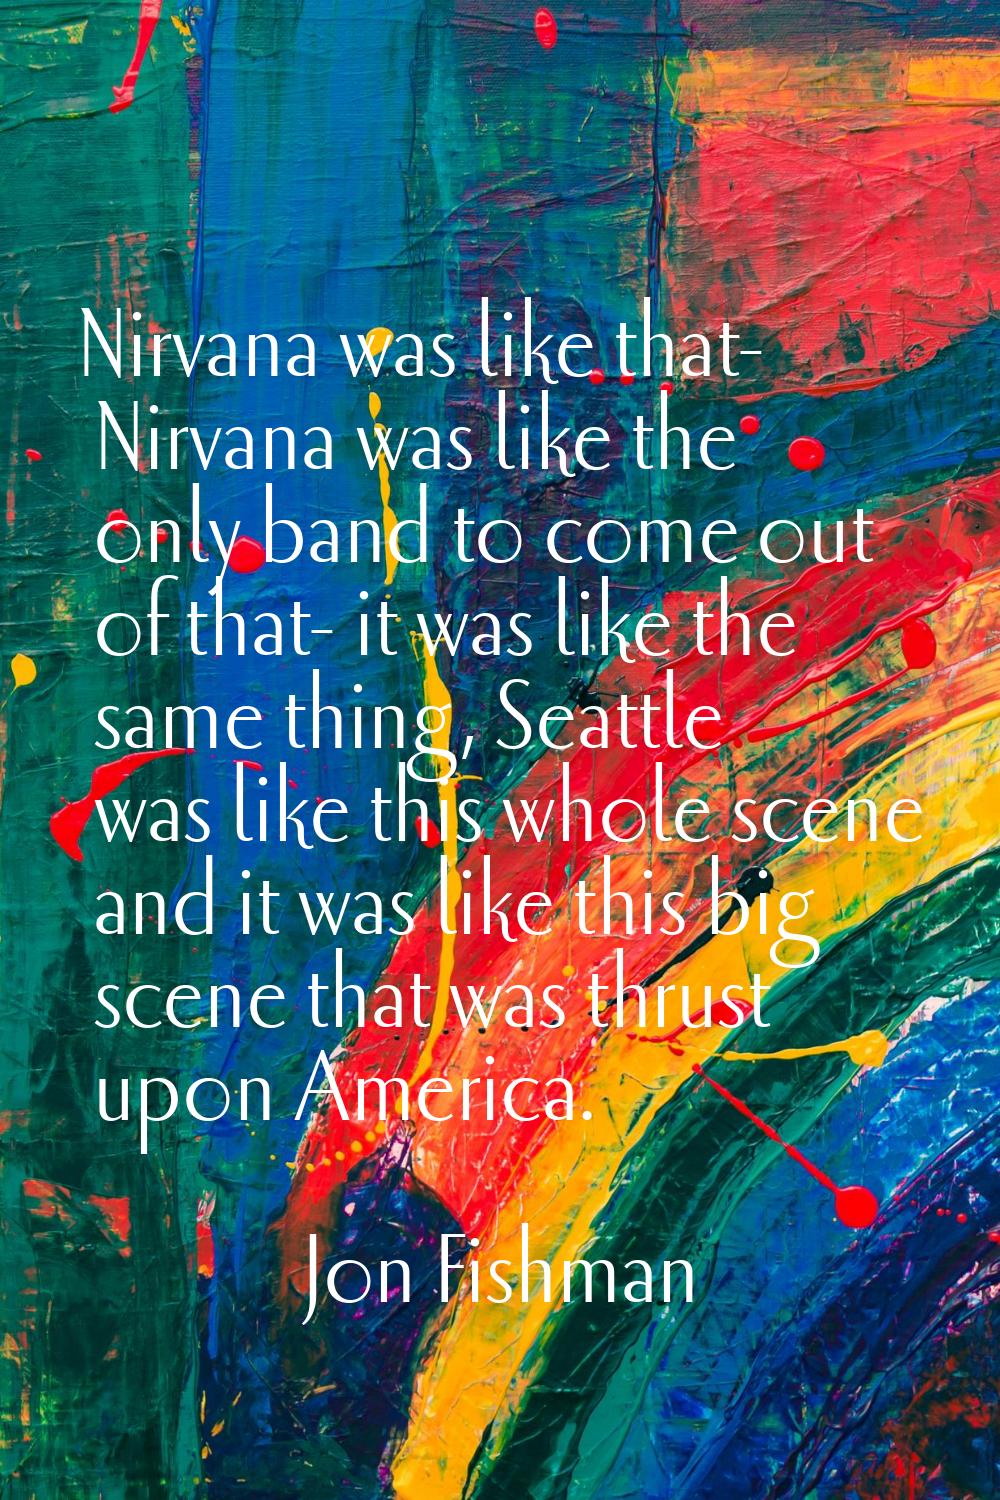 Nirvana was like that- Nirvana was like the only band to come out of that- it was like the same thi